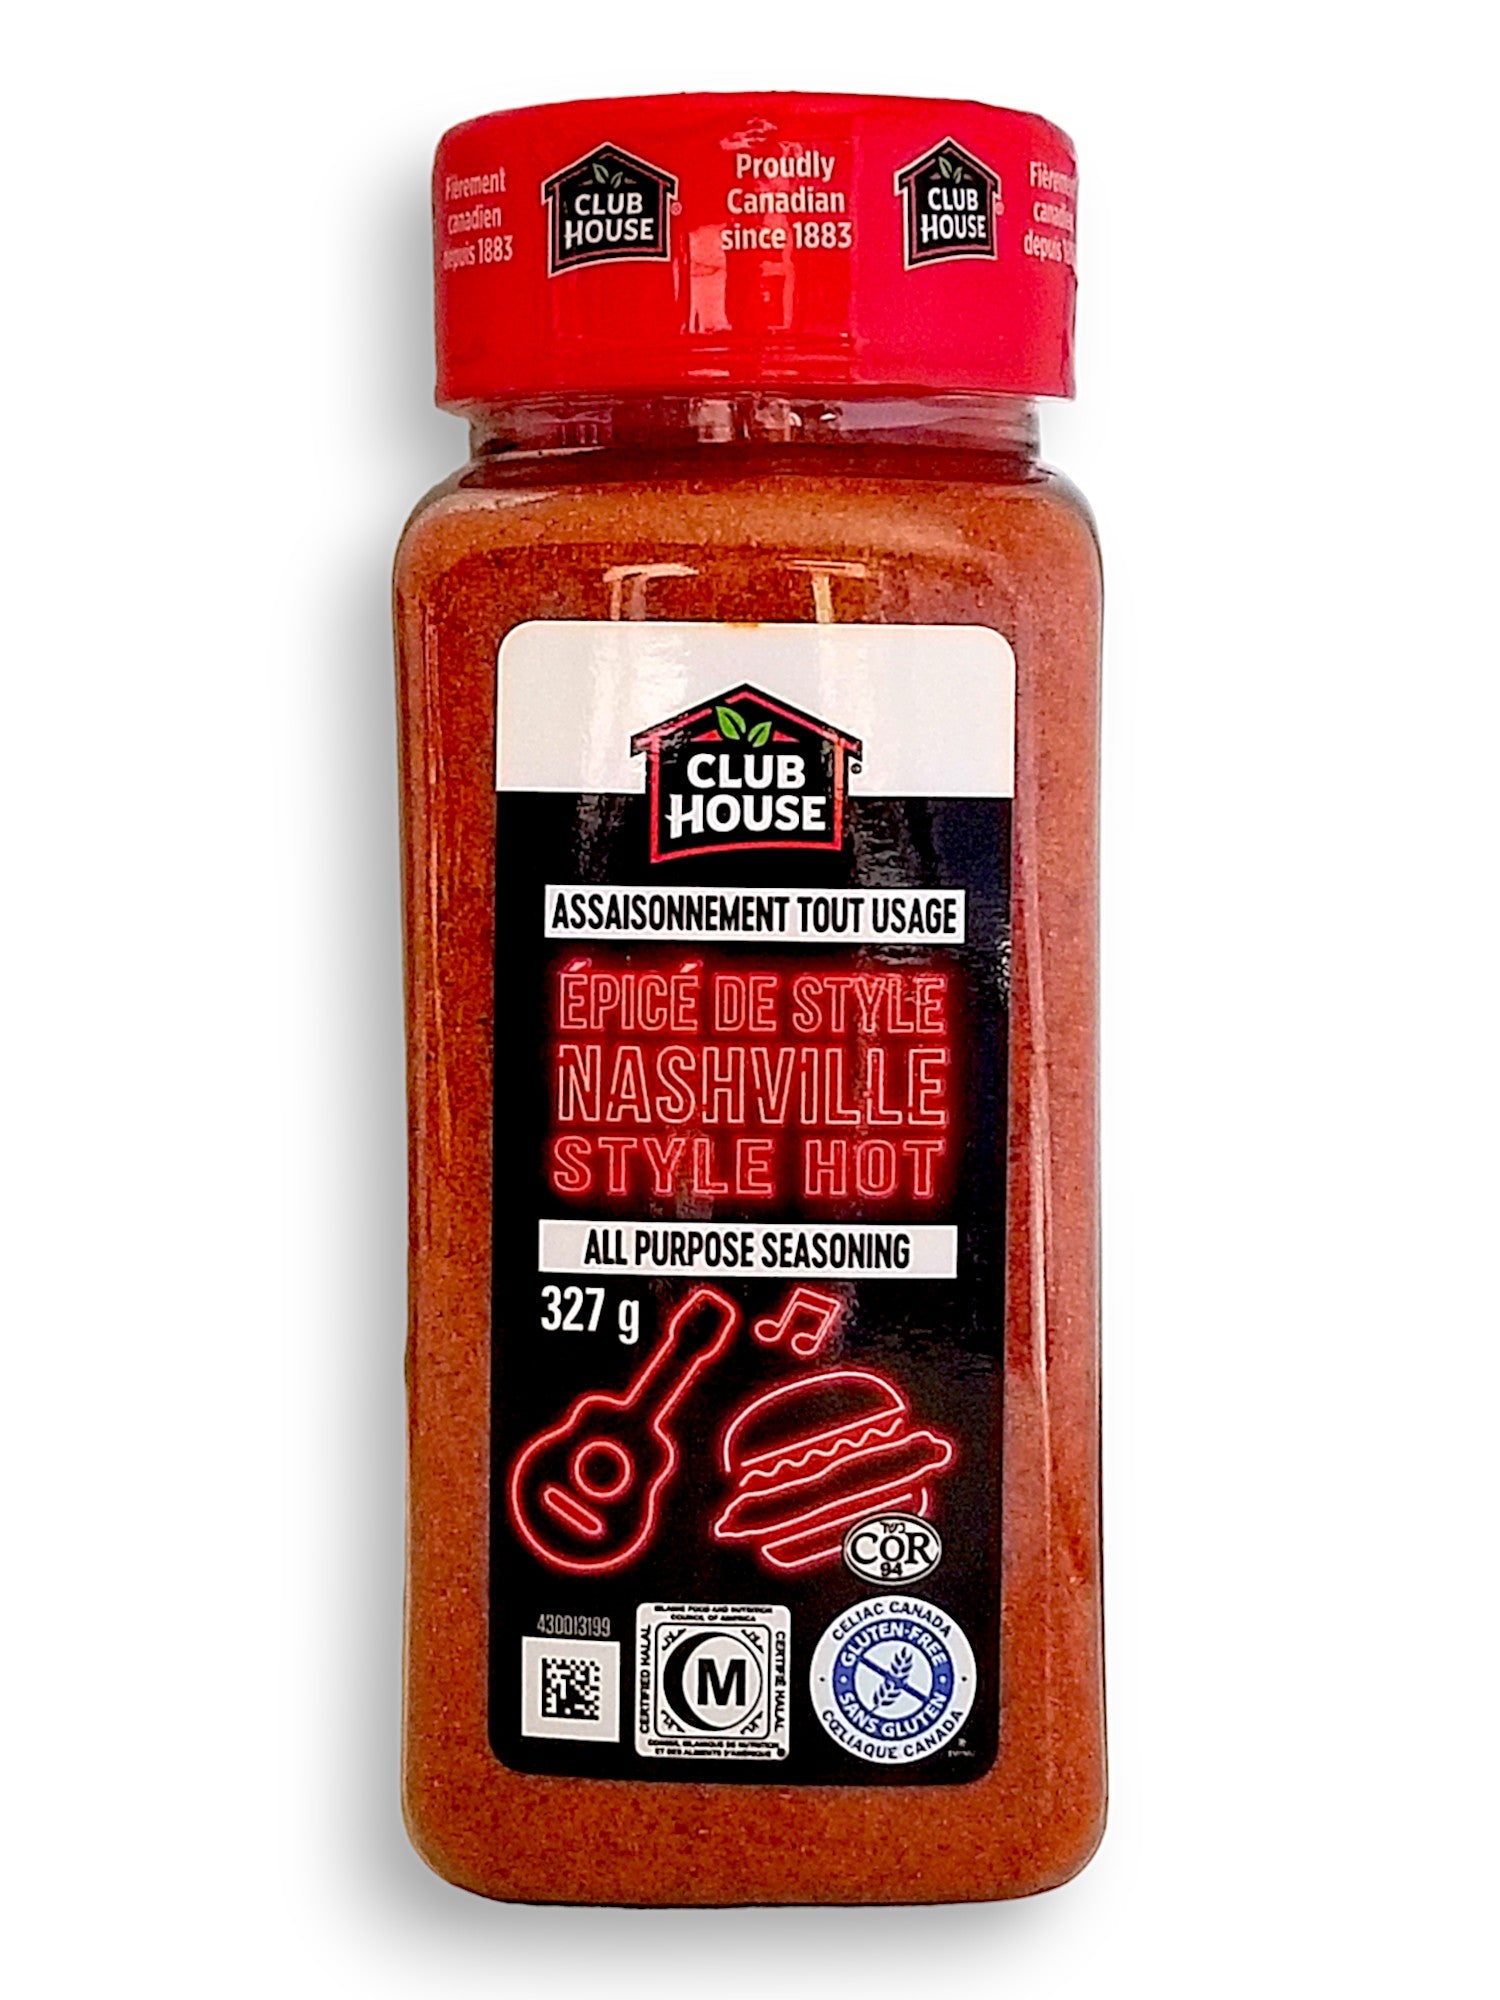 Club House Nashville Style Hot All Purpose Seasoning 327g, front of Shaker.